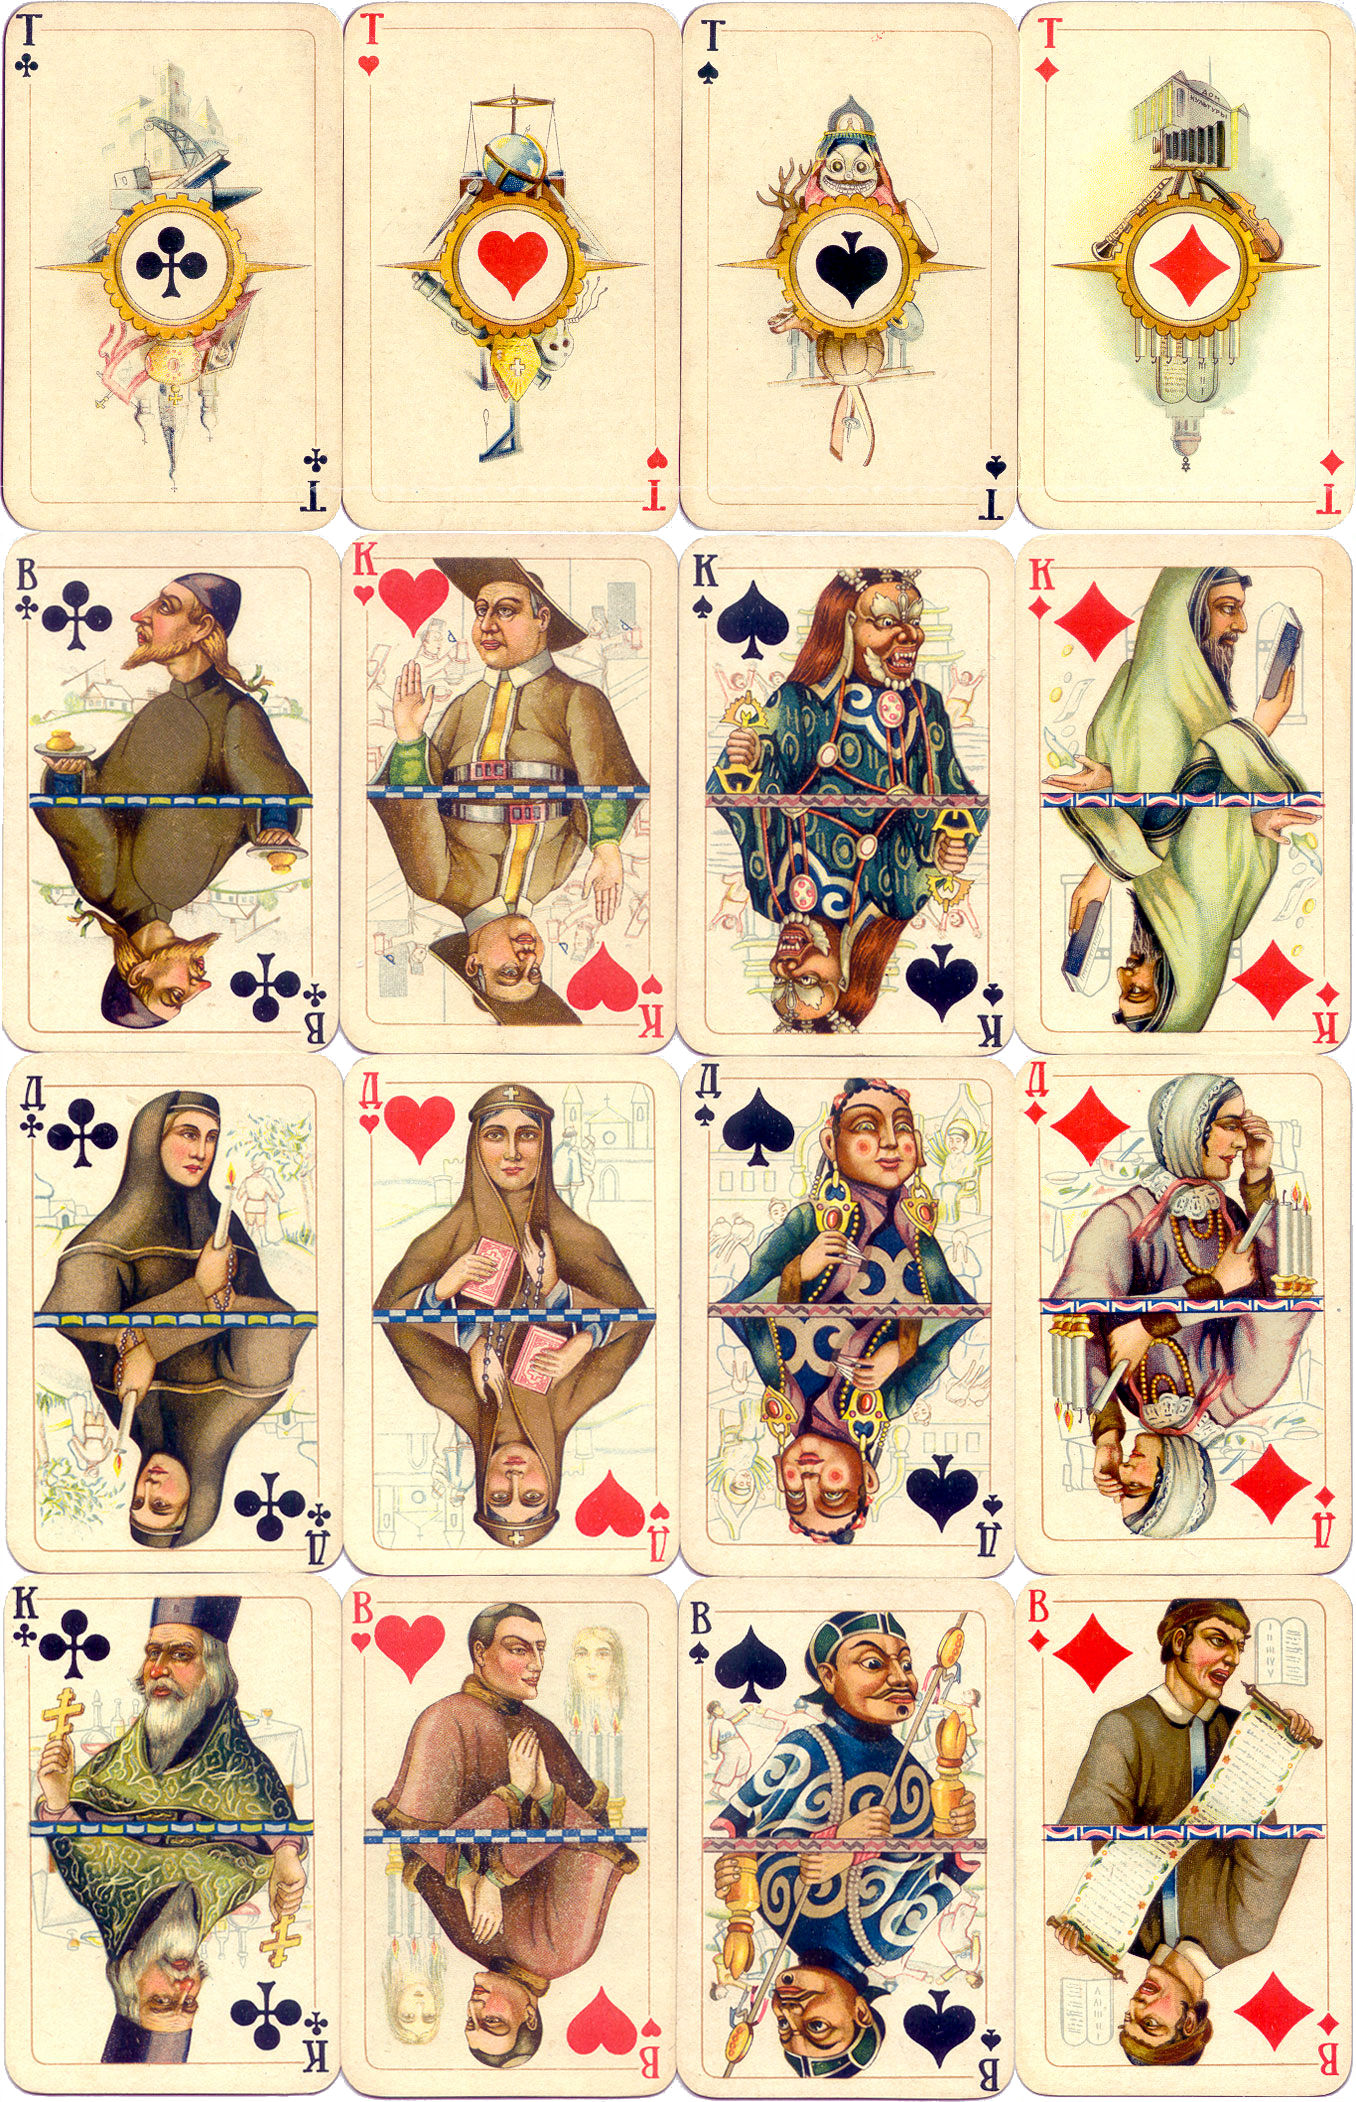 Russian “Anti-Religions” Playing Cards printed by chromolithography, 1934